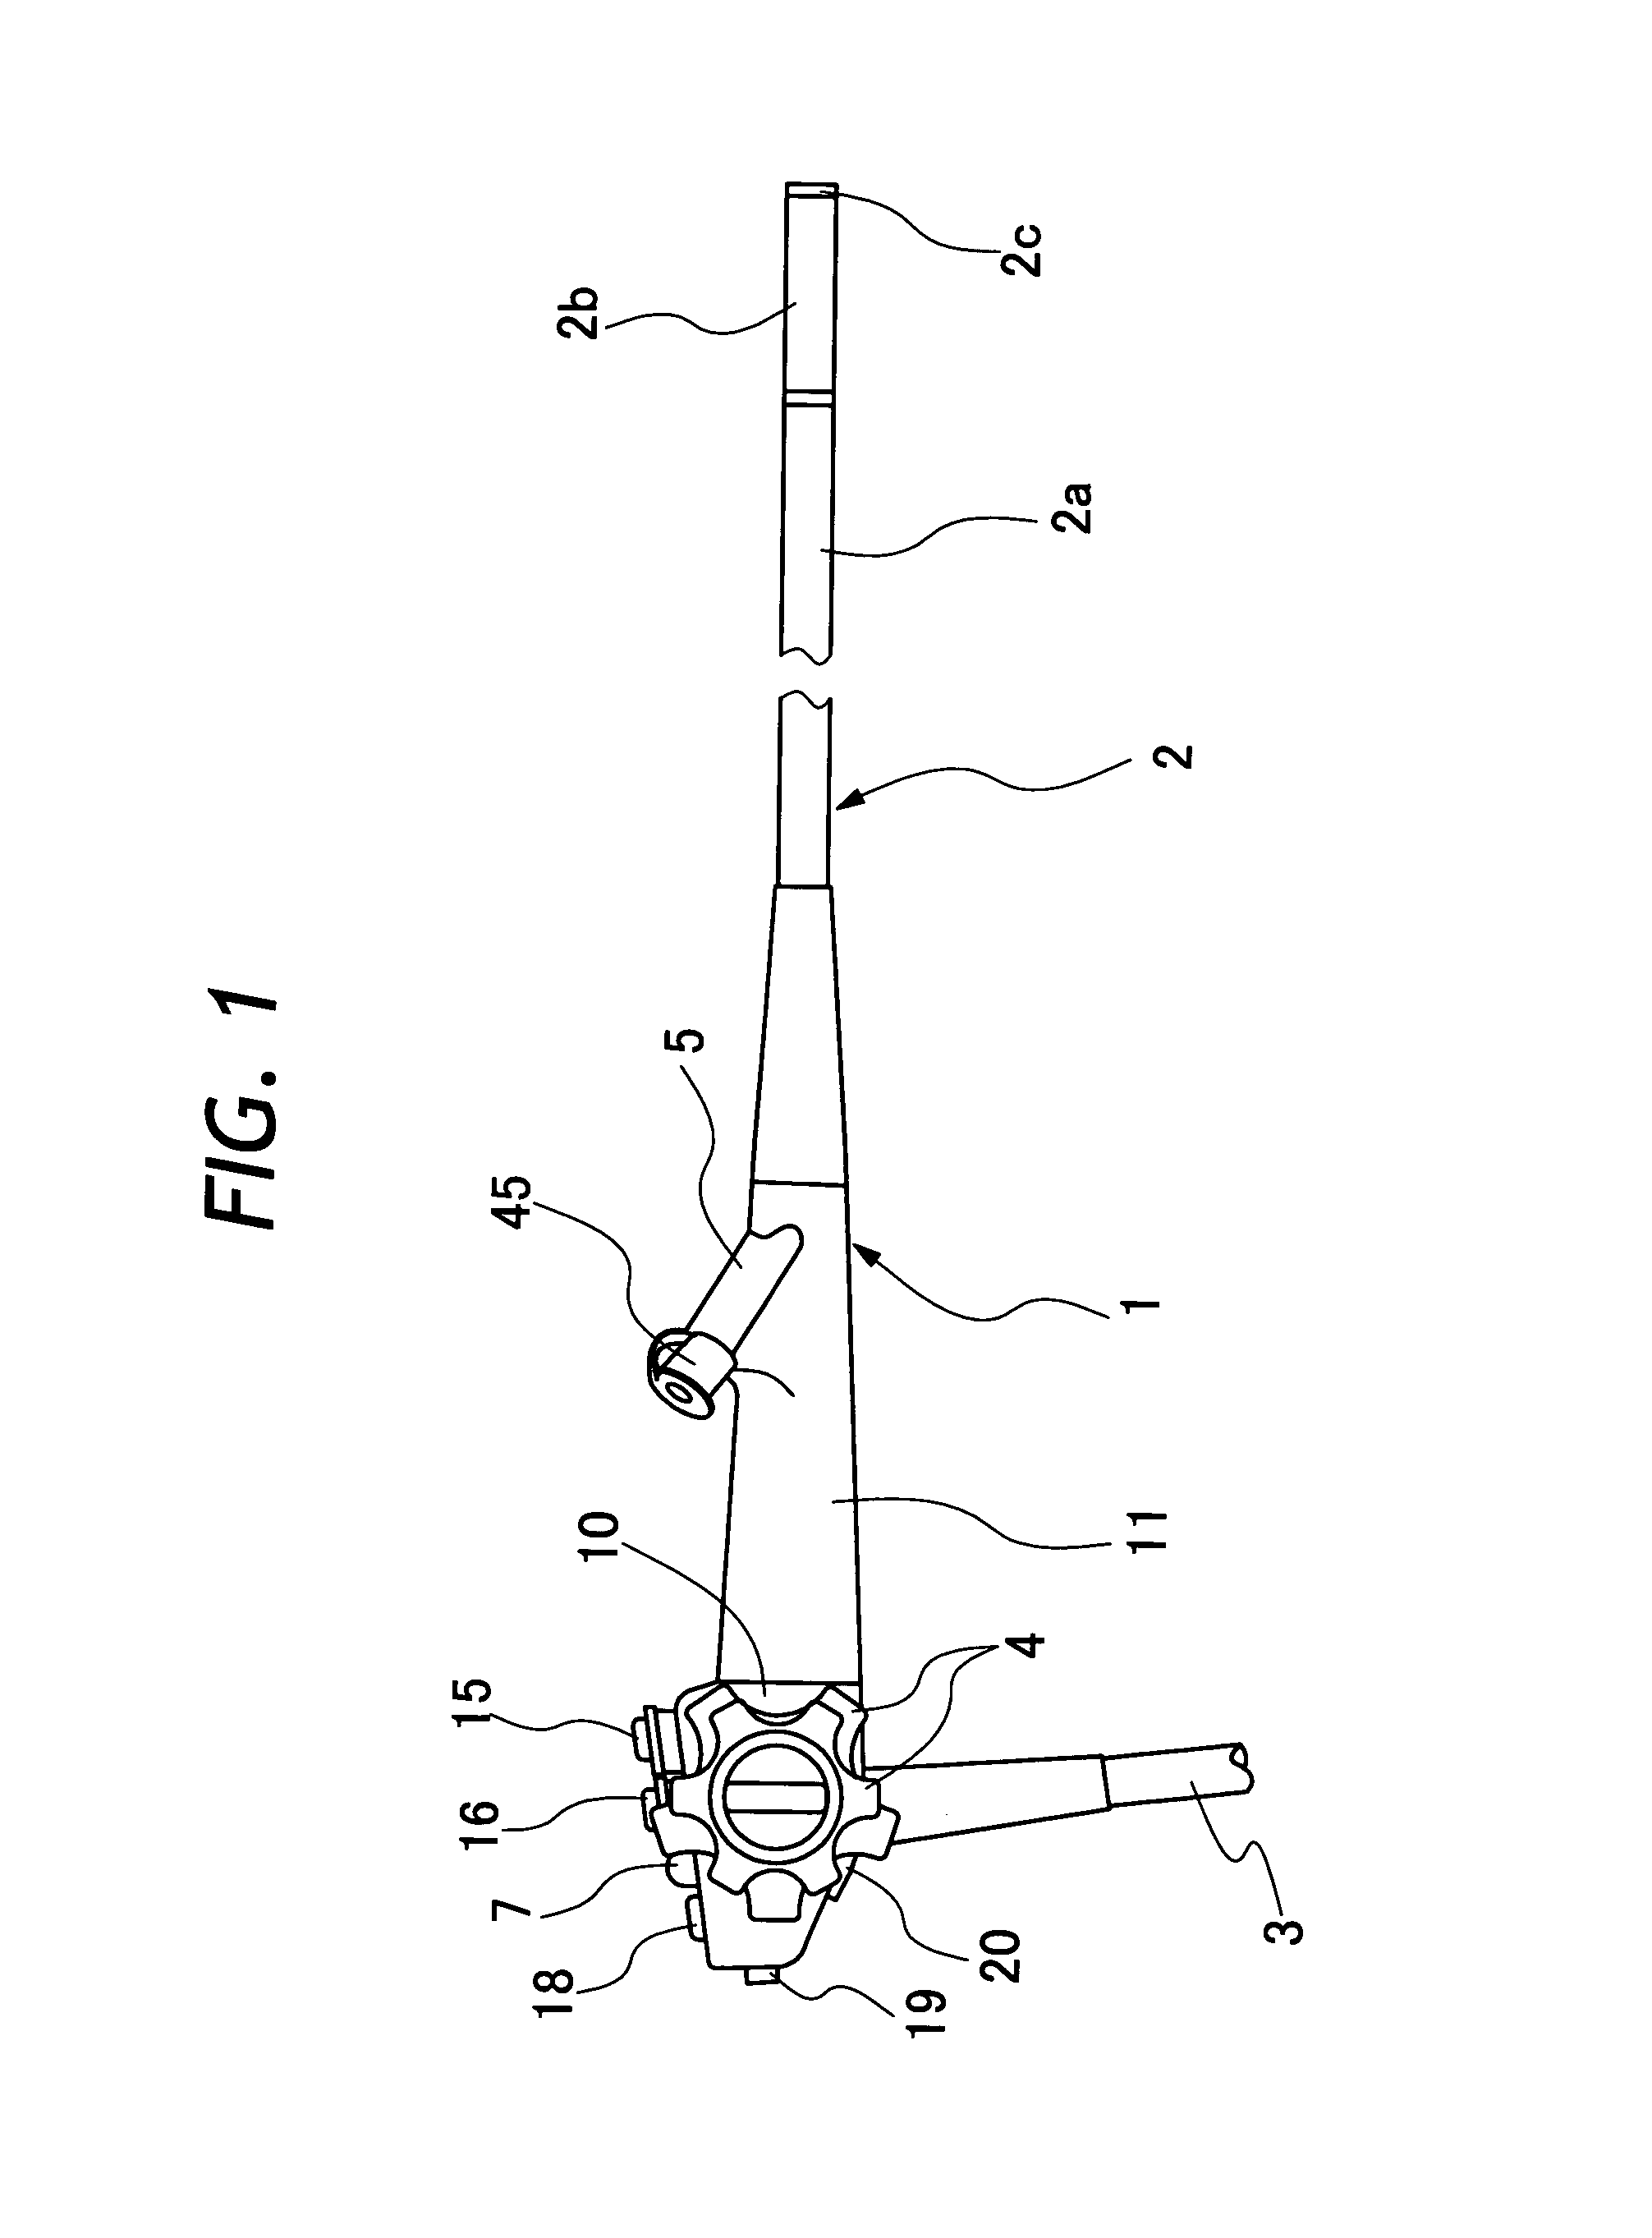 Anti-twist casing for endoscopic manipulating head assembly